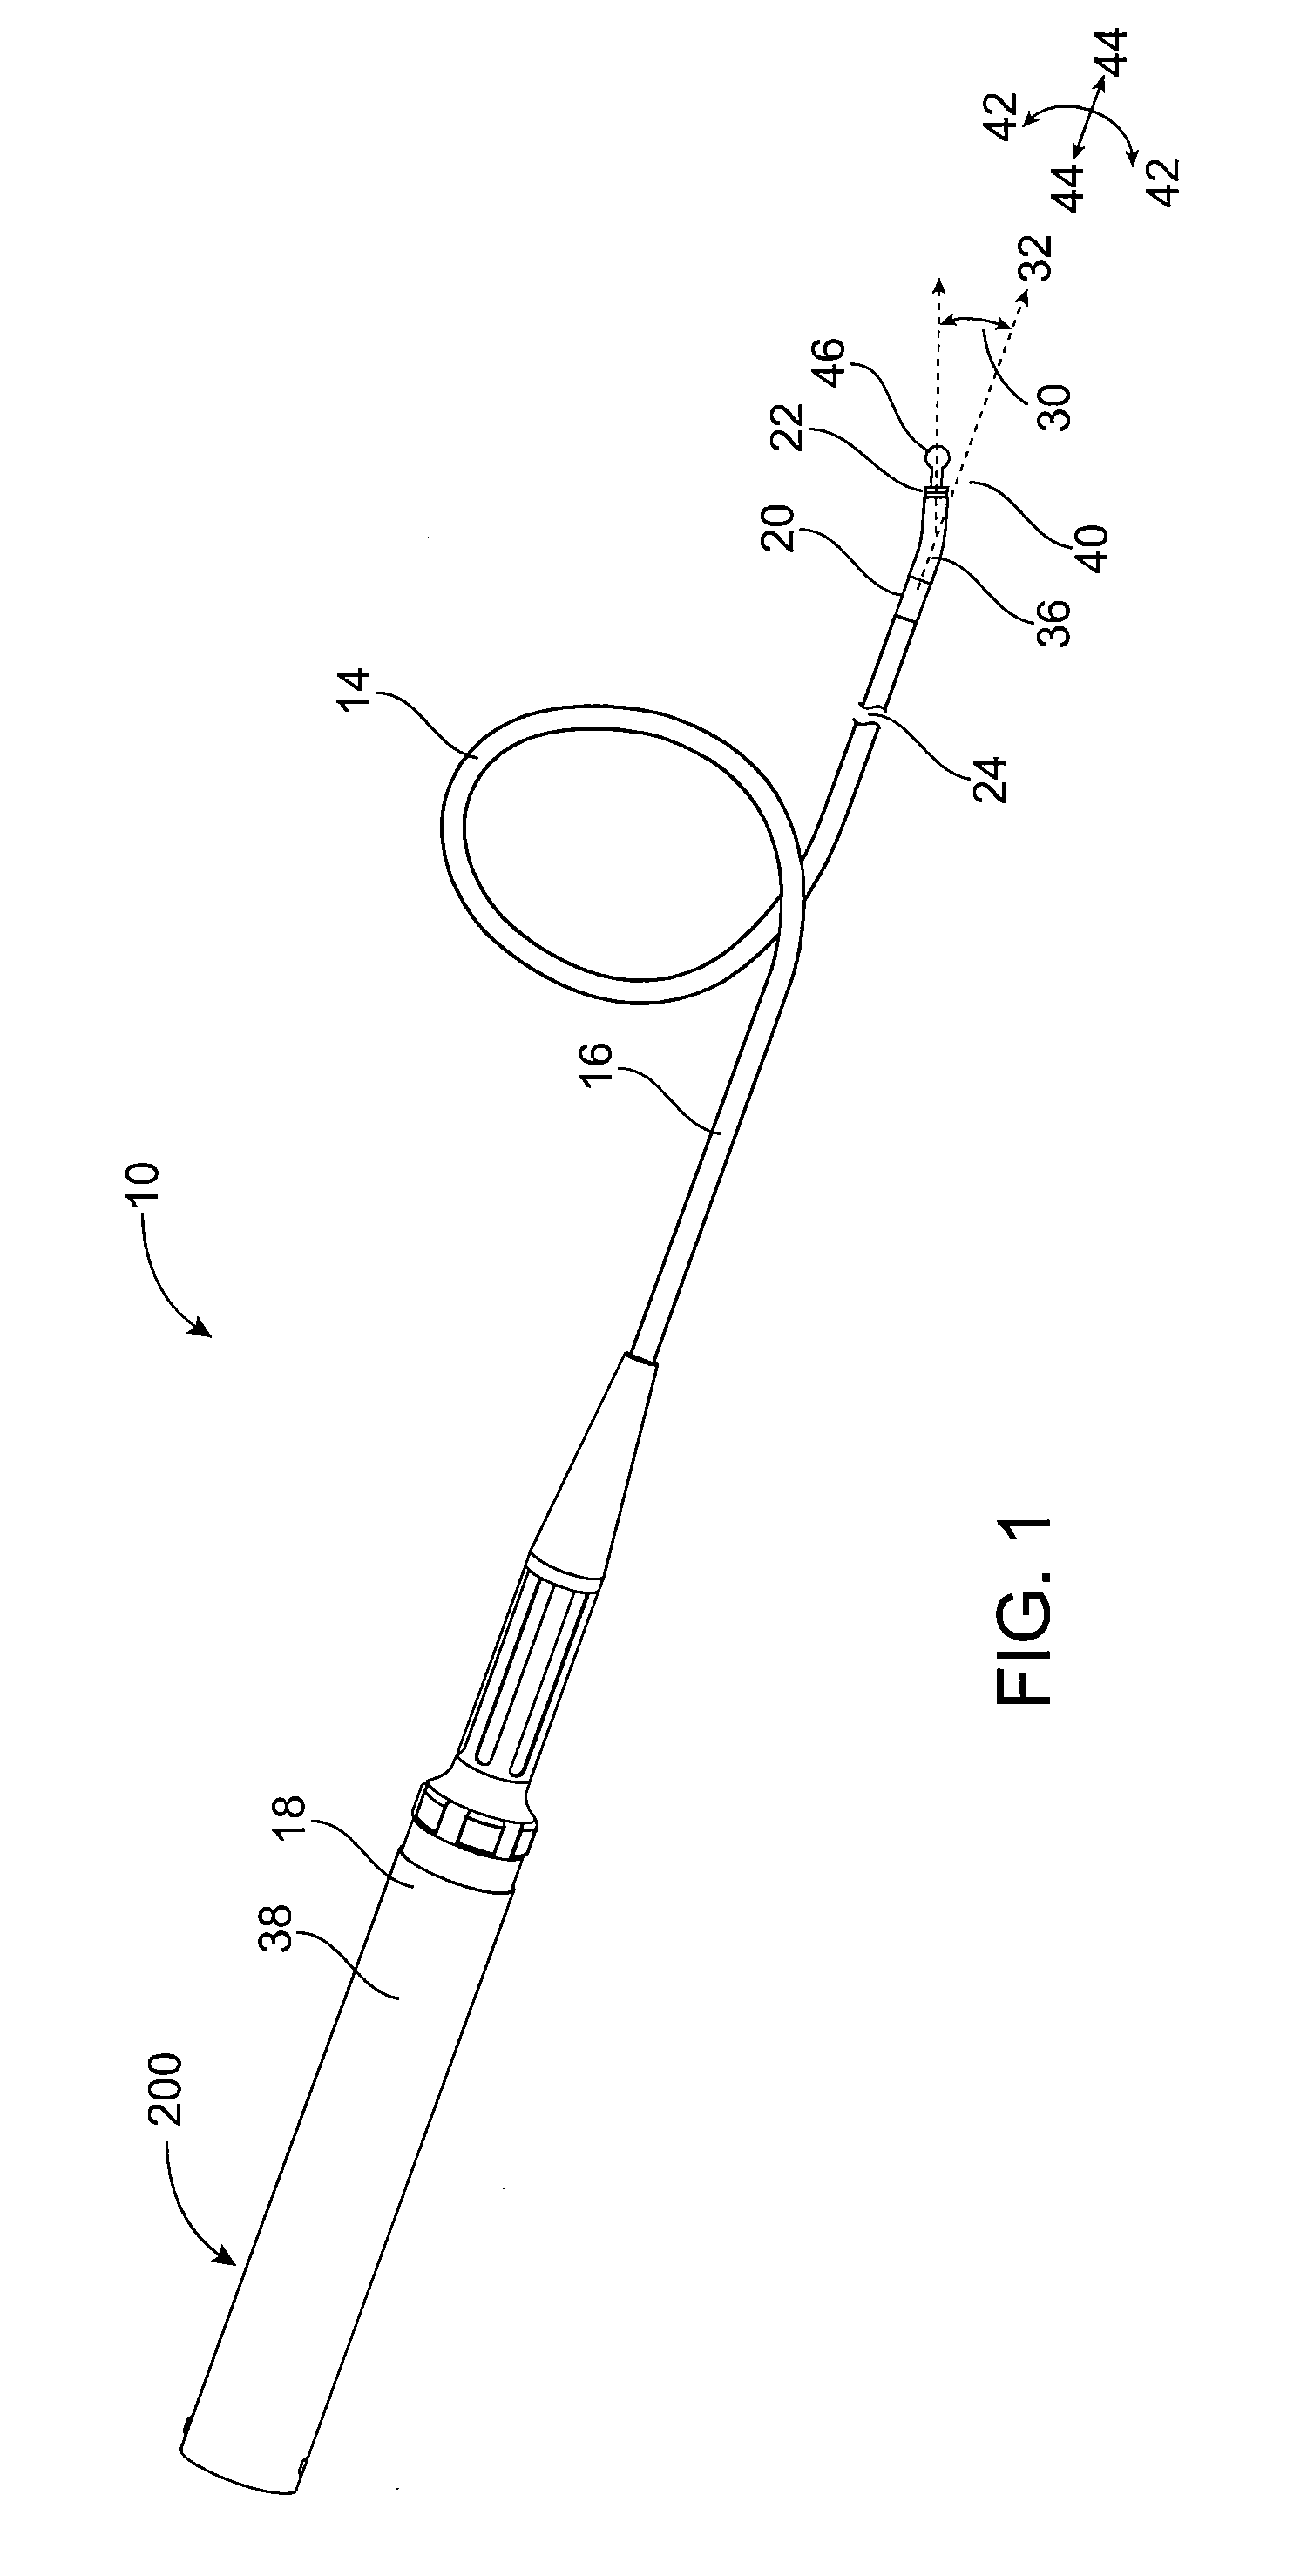 Apparatus for crossing occlusions or stenoses